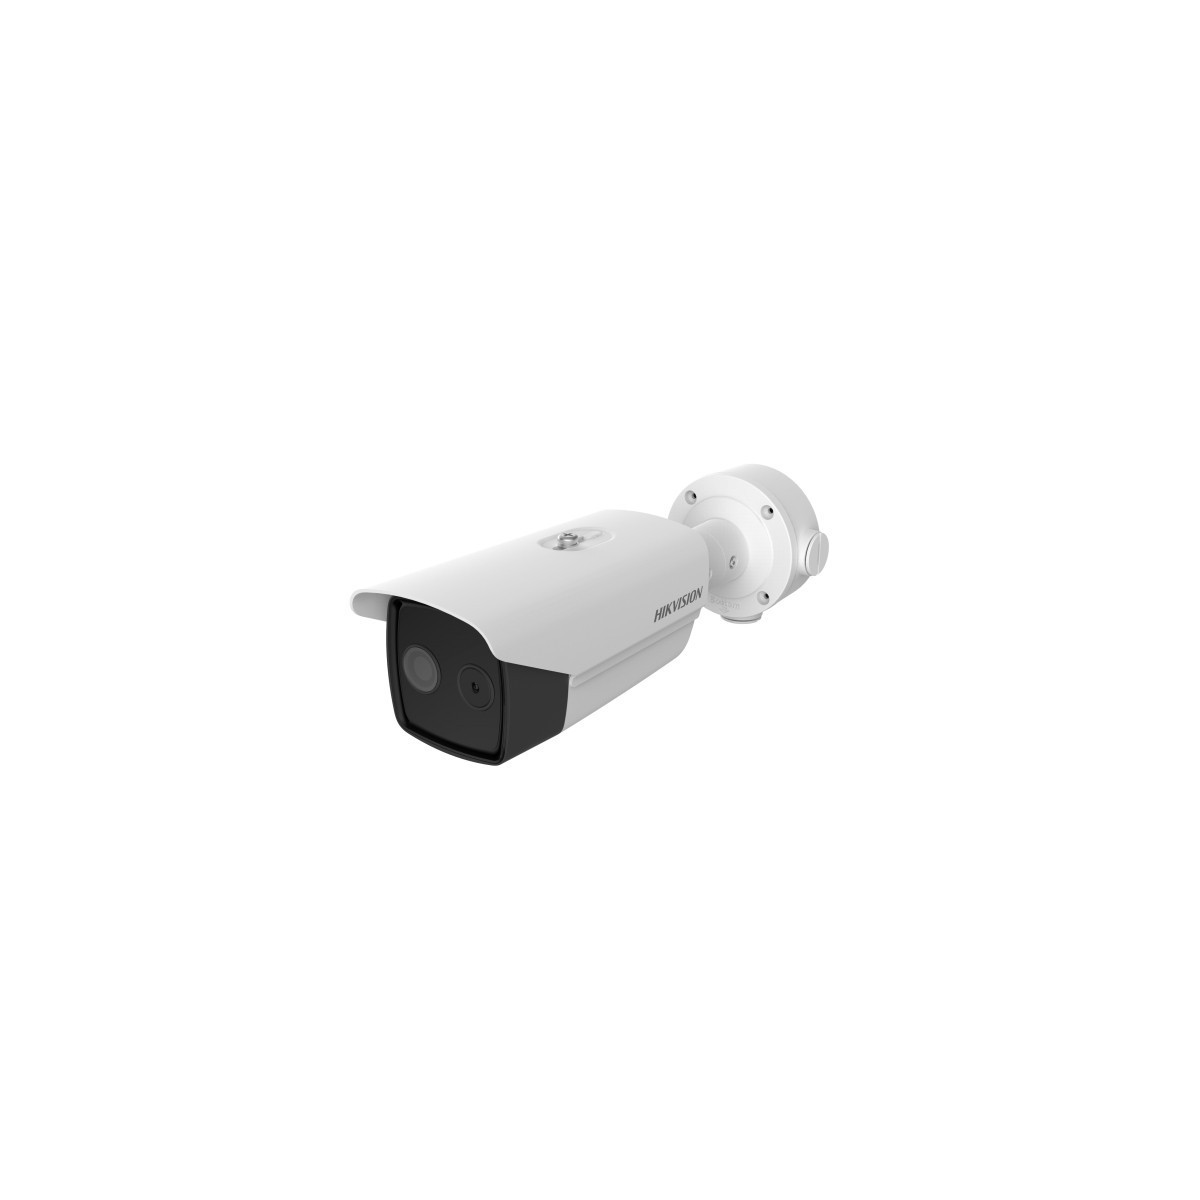 Hikvision Digital Technology DS-2TD2637B-10/P - IP security camera - Indoor & outdoor - Wired - Multi - Bullet - Ceiling/Wall